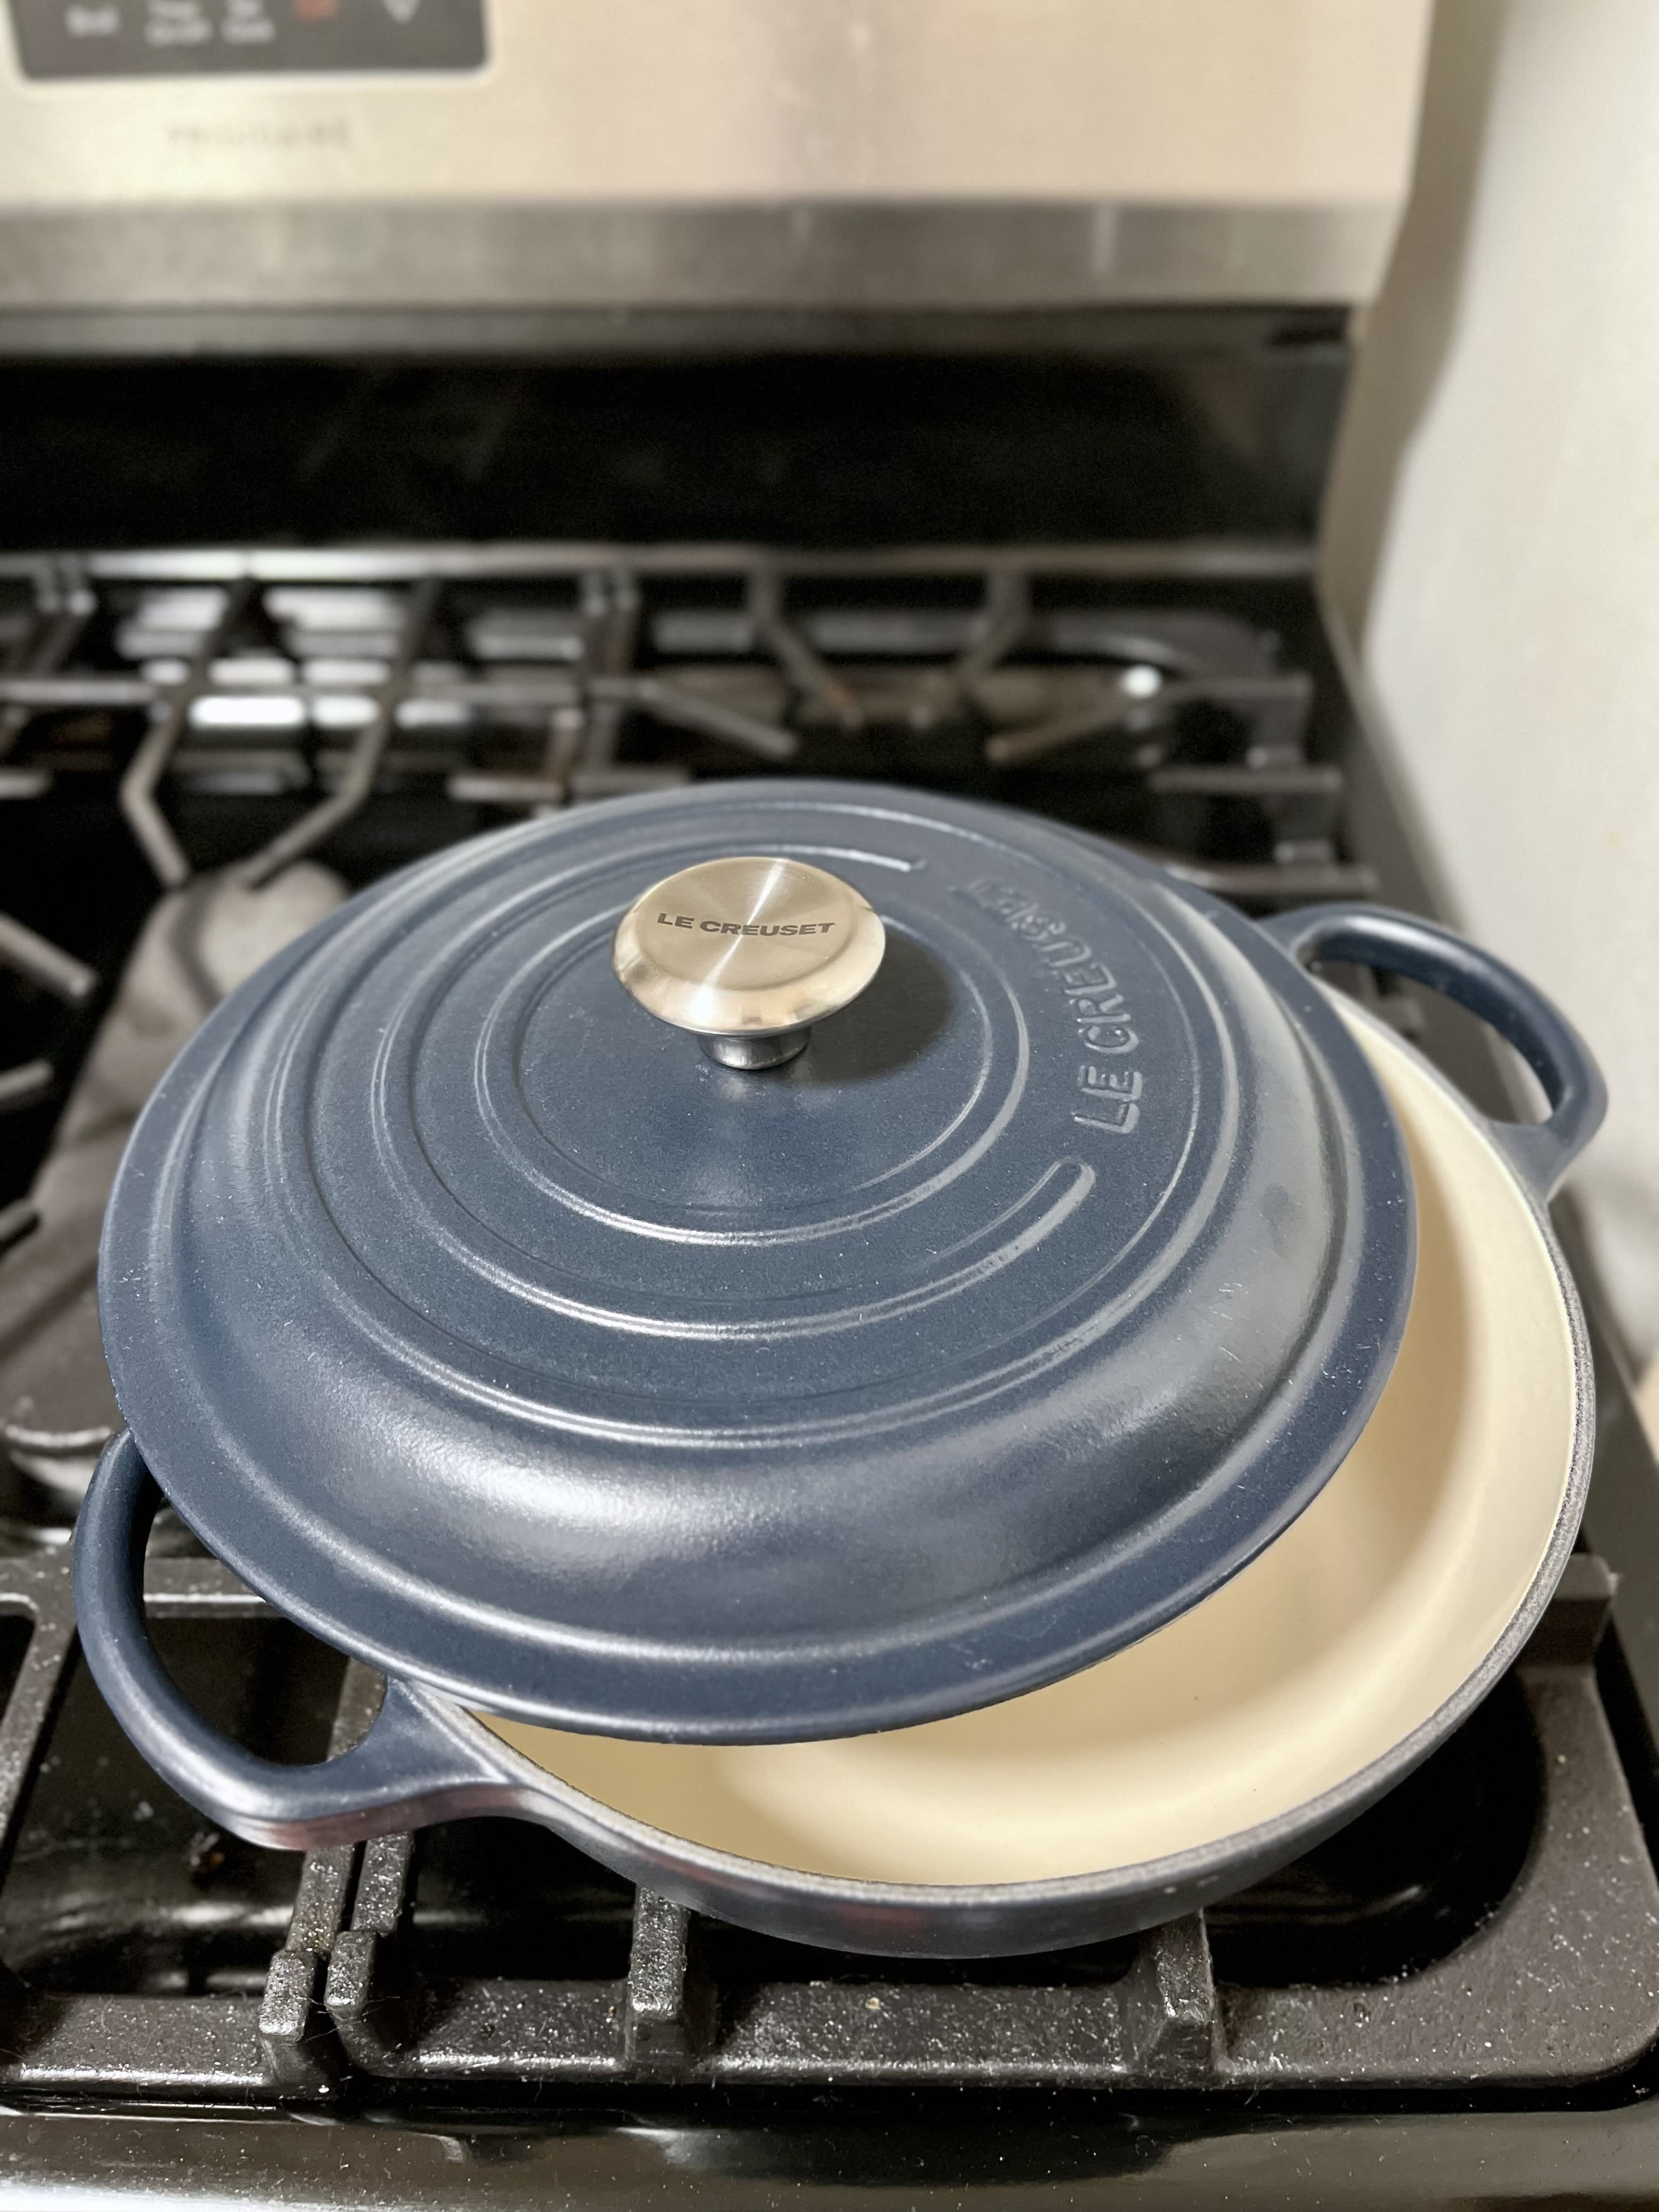 https://cdn.apartmenttherapy.info/image/upload/v1677100720/commerce/le-creuset-signature-french-oven-product-photo-1.jpg